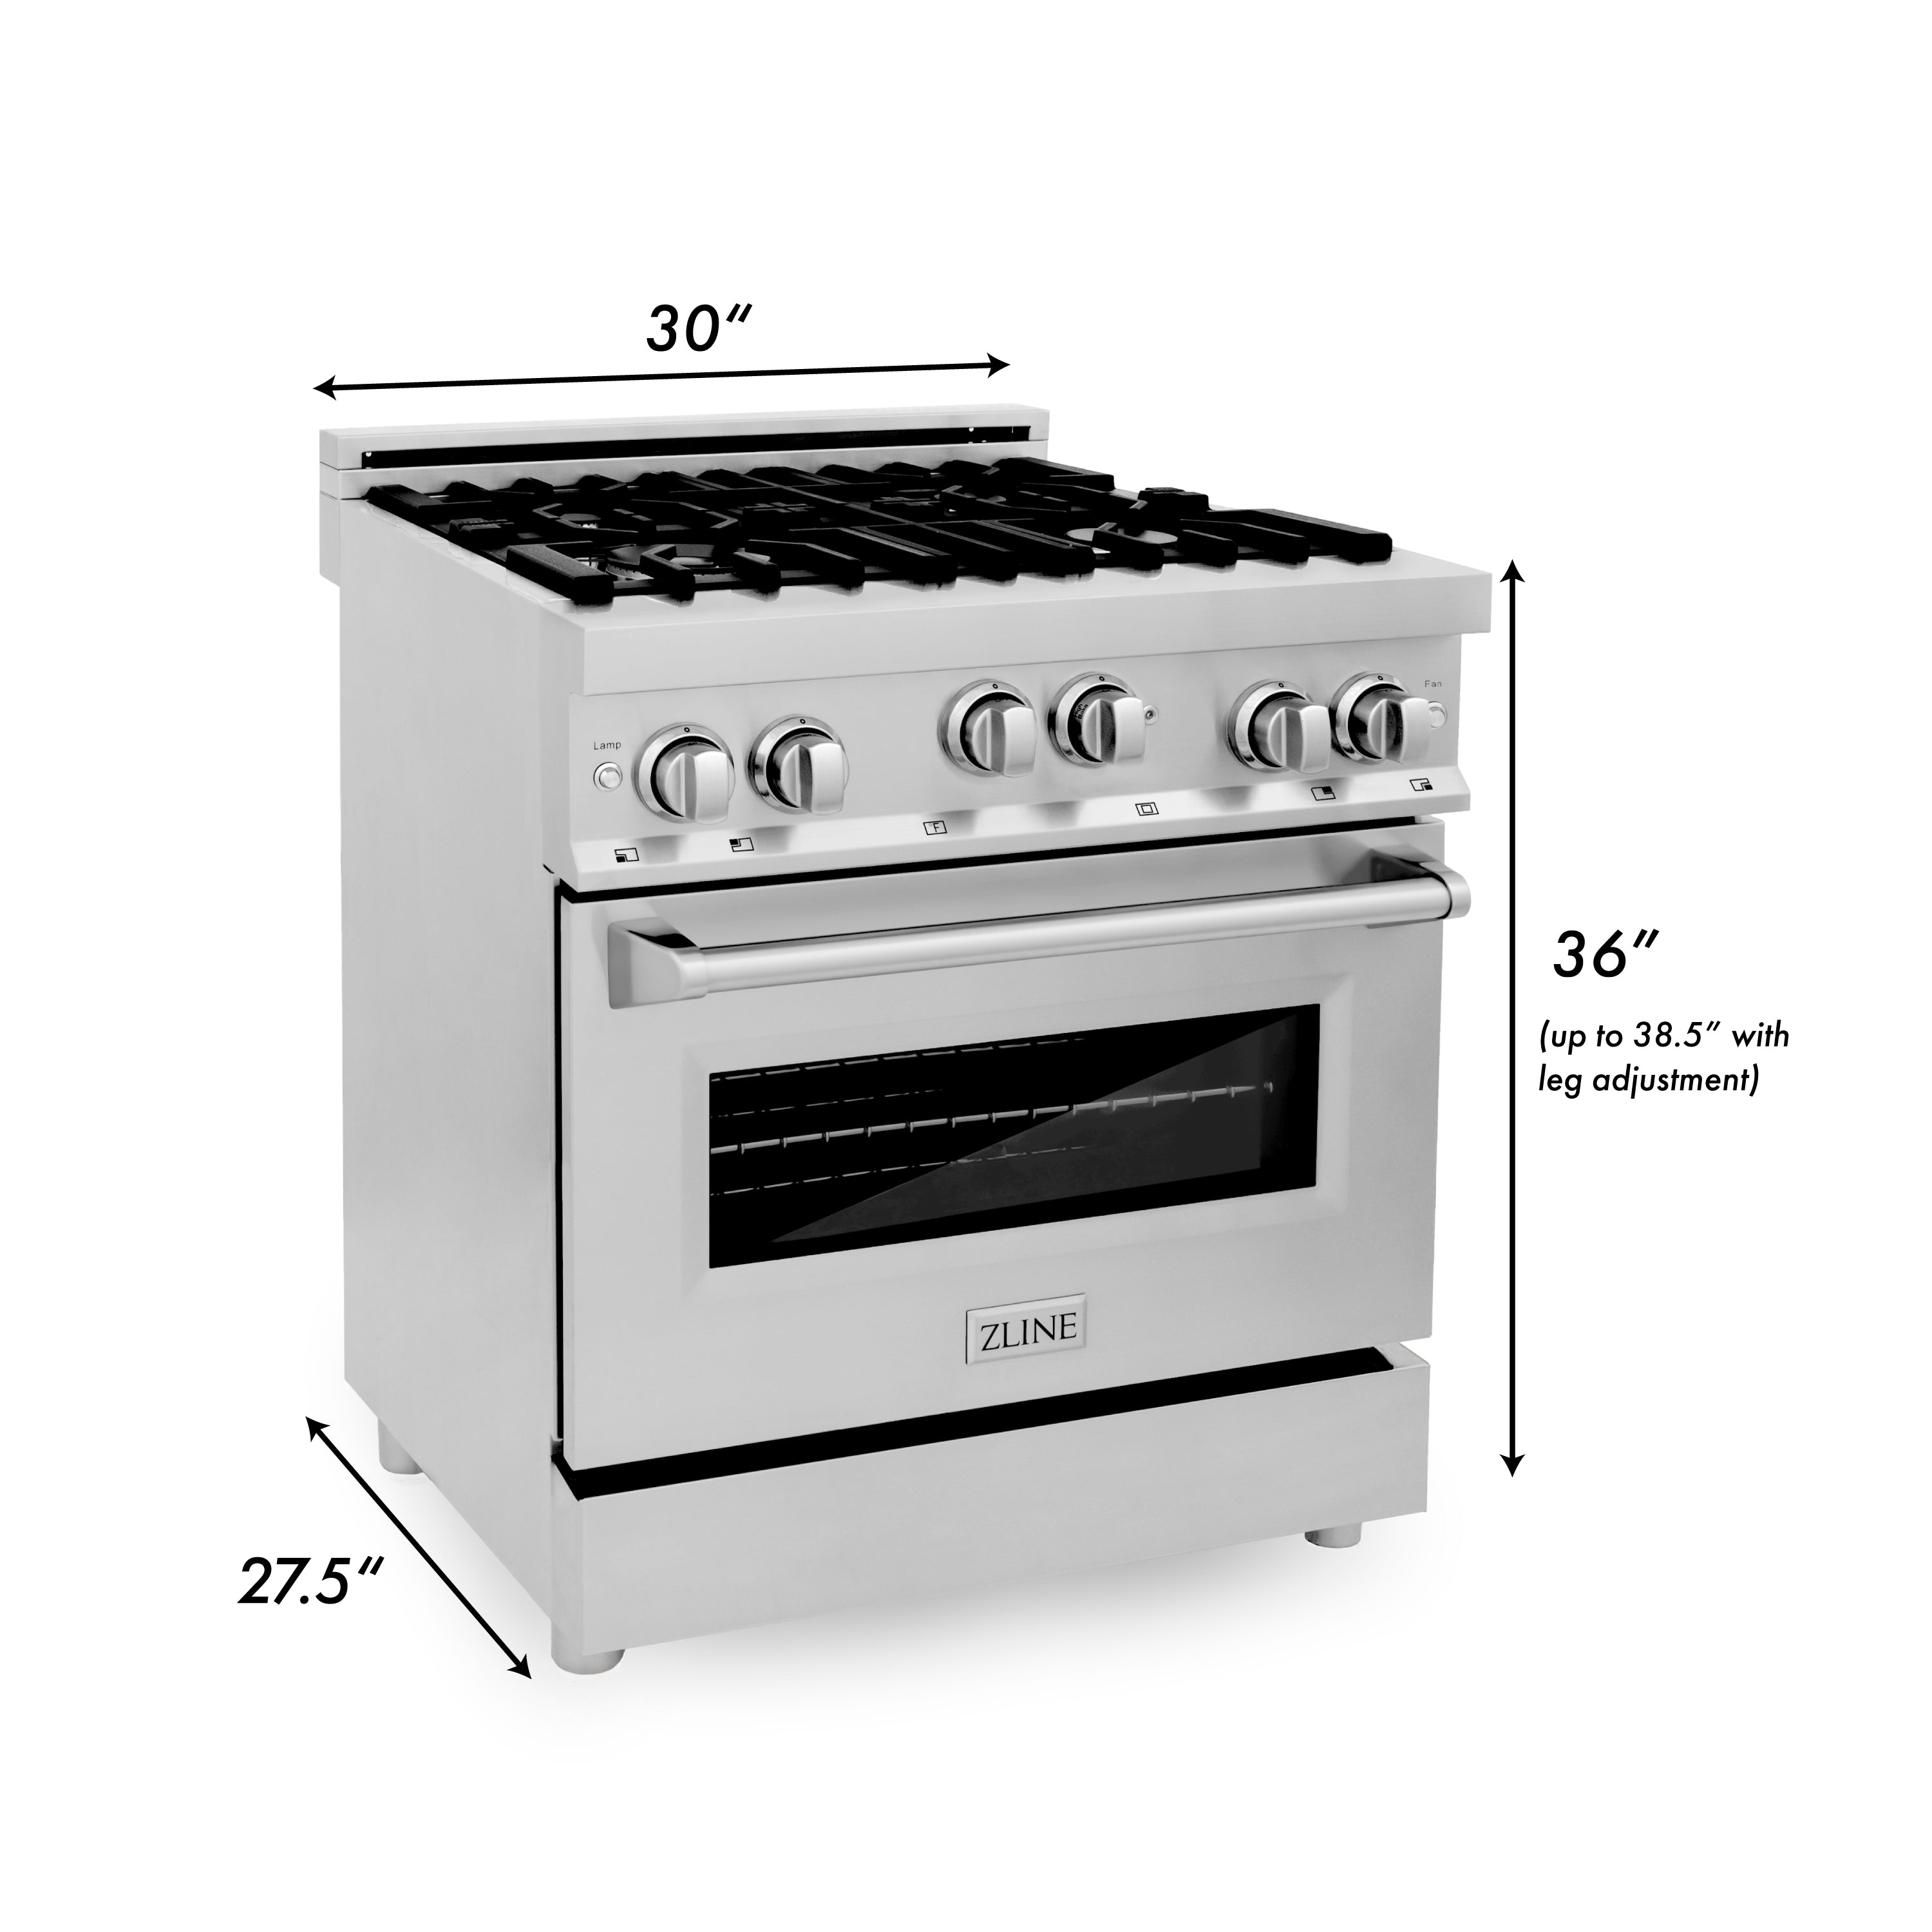 ZLINE 30 in. 4.0 cu. ft. Range with Gas Stove and Gas Oven in Stainless Steel with Reversible Griddle (RG-GR-30)